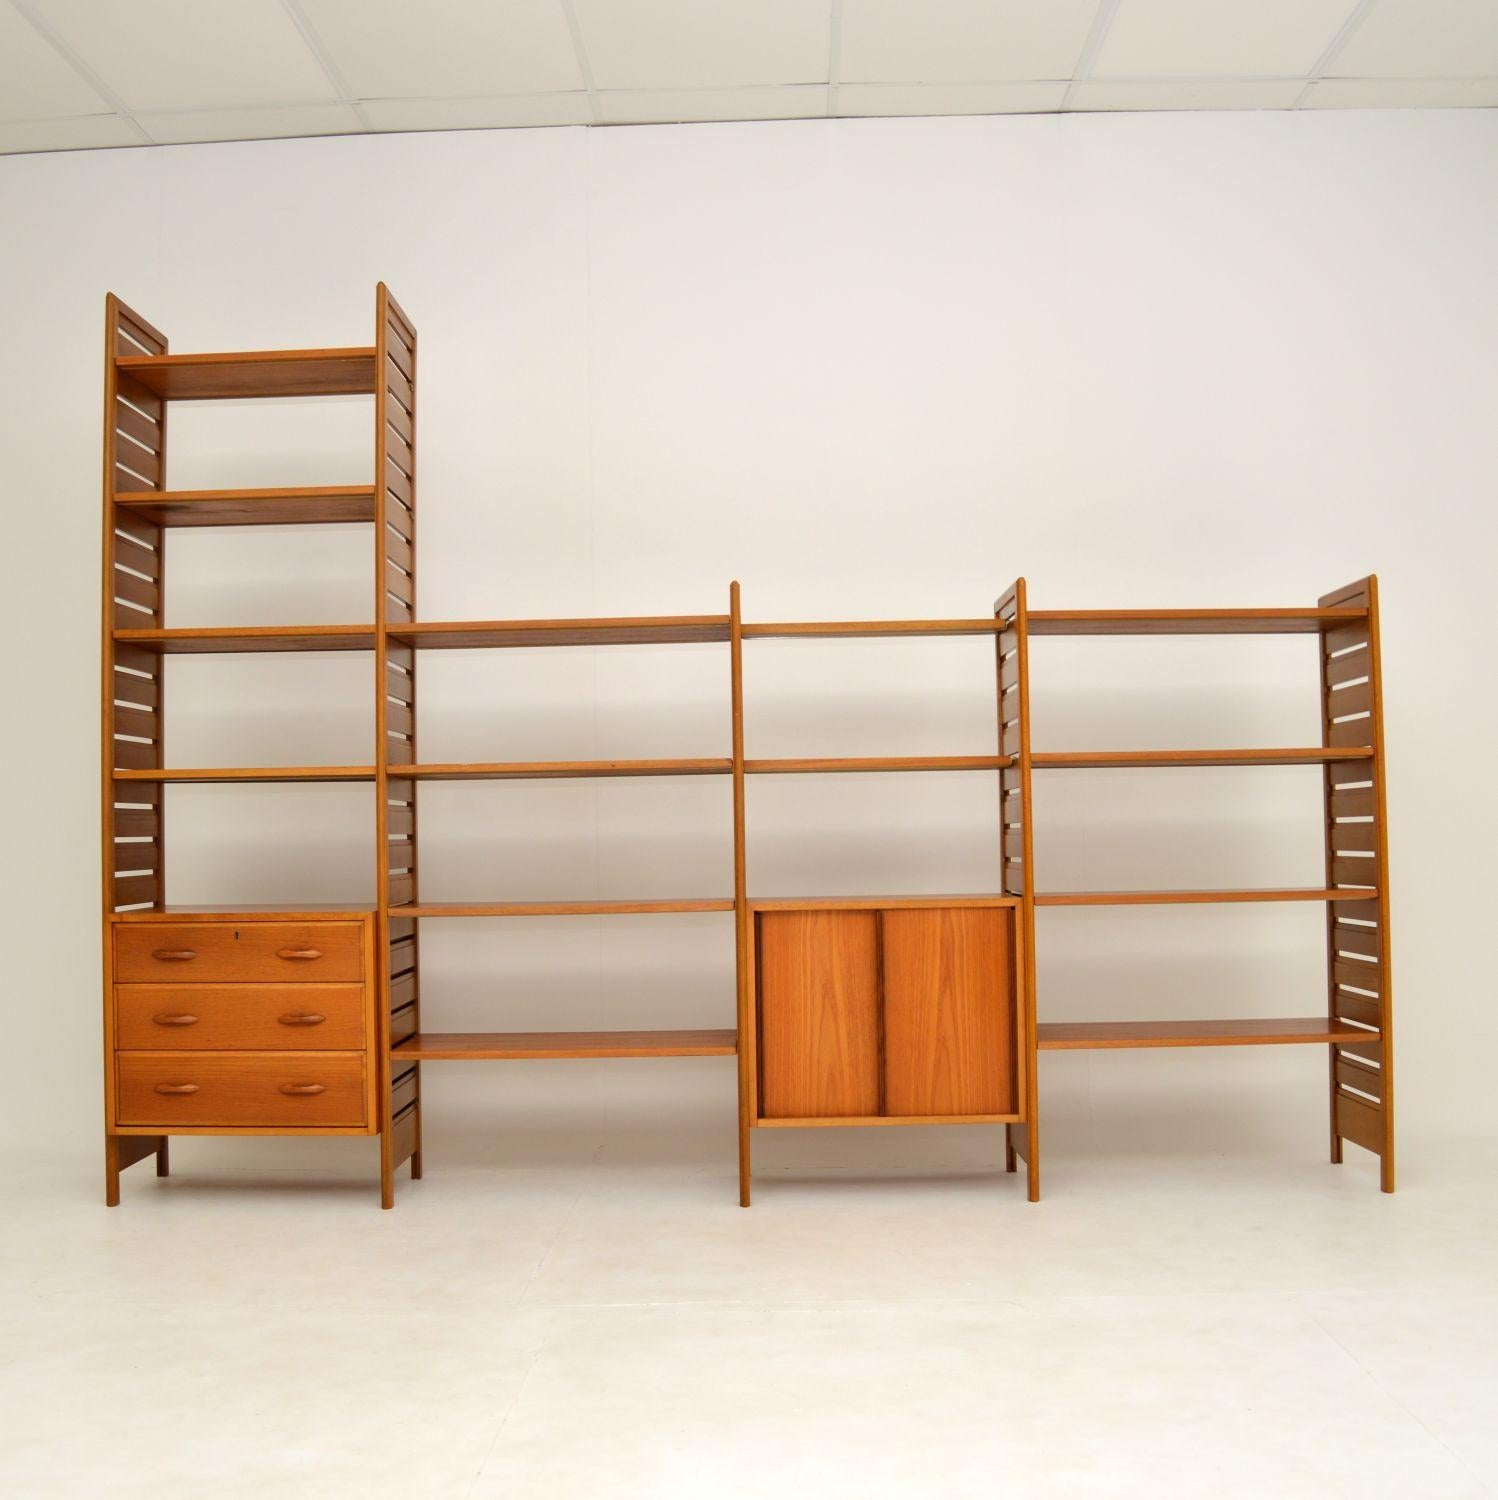 A large and impressive teak Ladderax shelving system by Staples. This was made in England and dates from the 1960’s.

This four bay system consists of two tall ladder rails, three shorter ladder rails, a three drawer chest, a sliding door cabinet